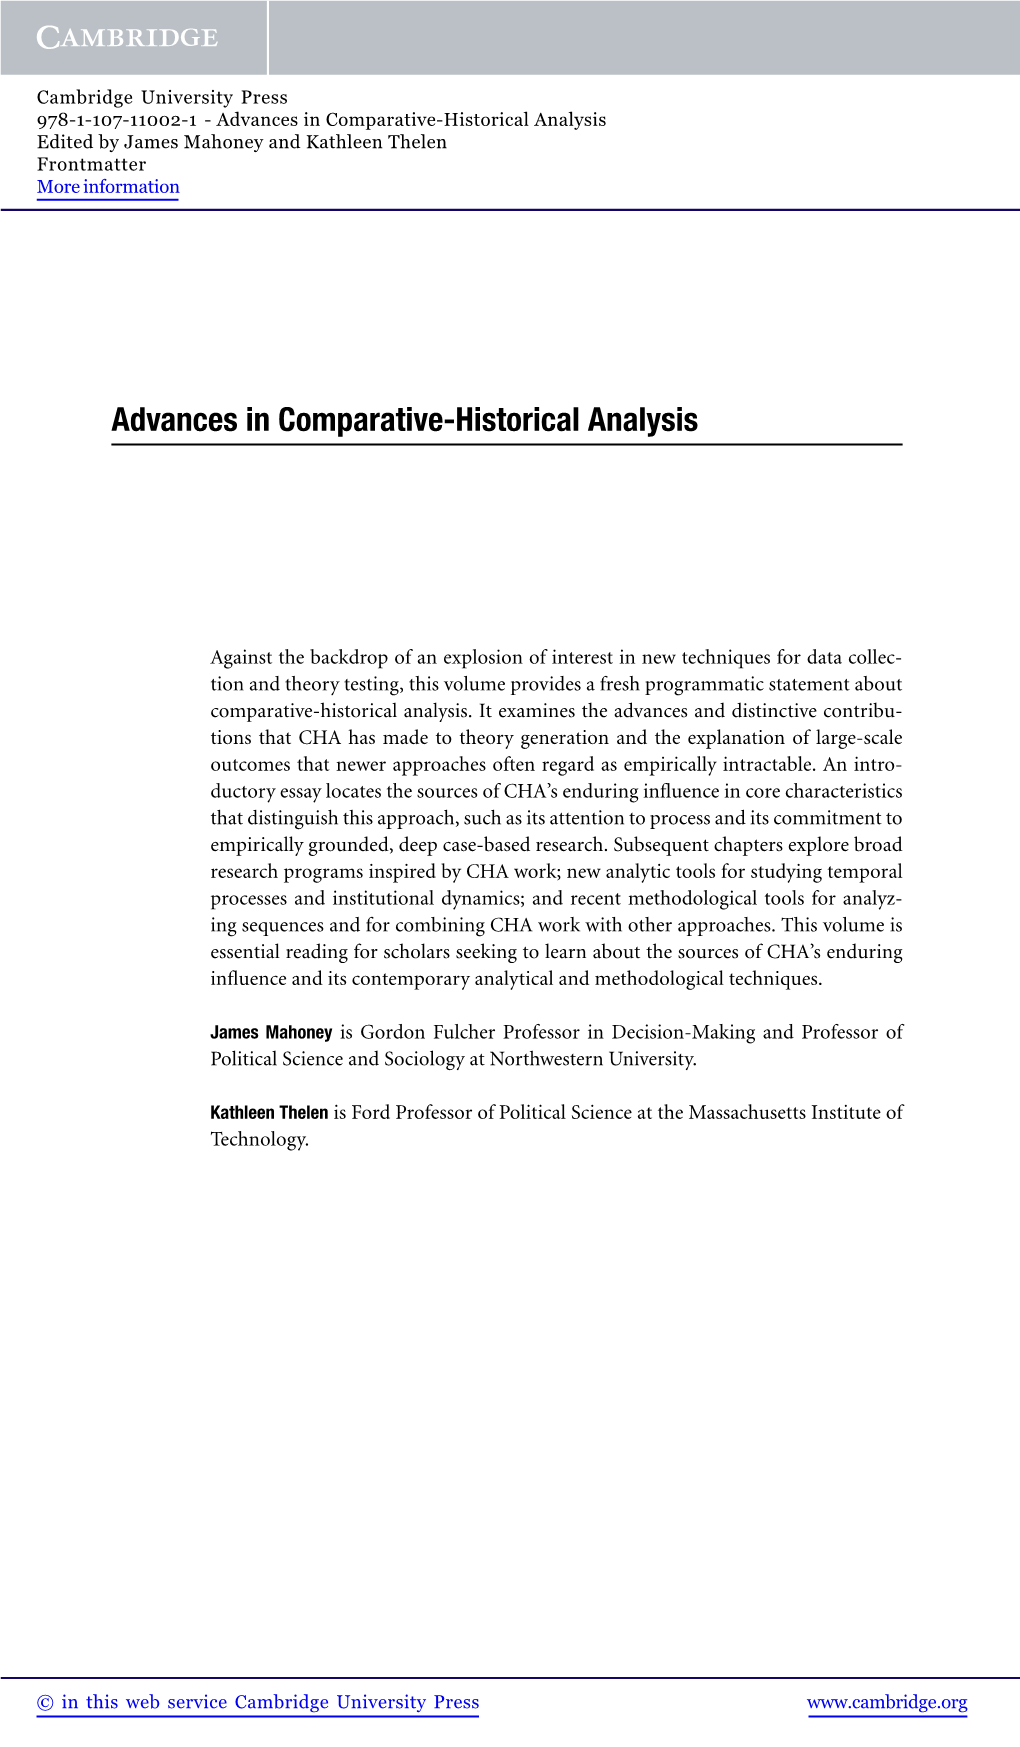 Advances in Comparative-Historical Analysis Edited by James Mahoney and Kathleen Thelen Frontmatter More Information